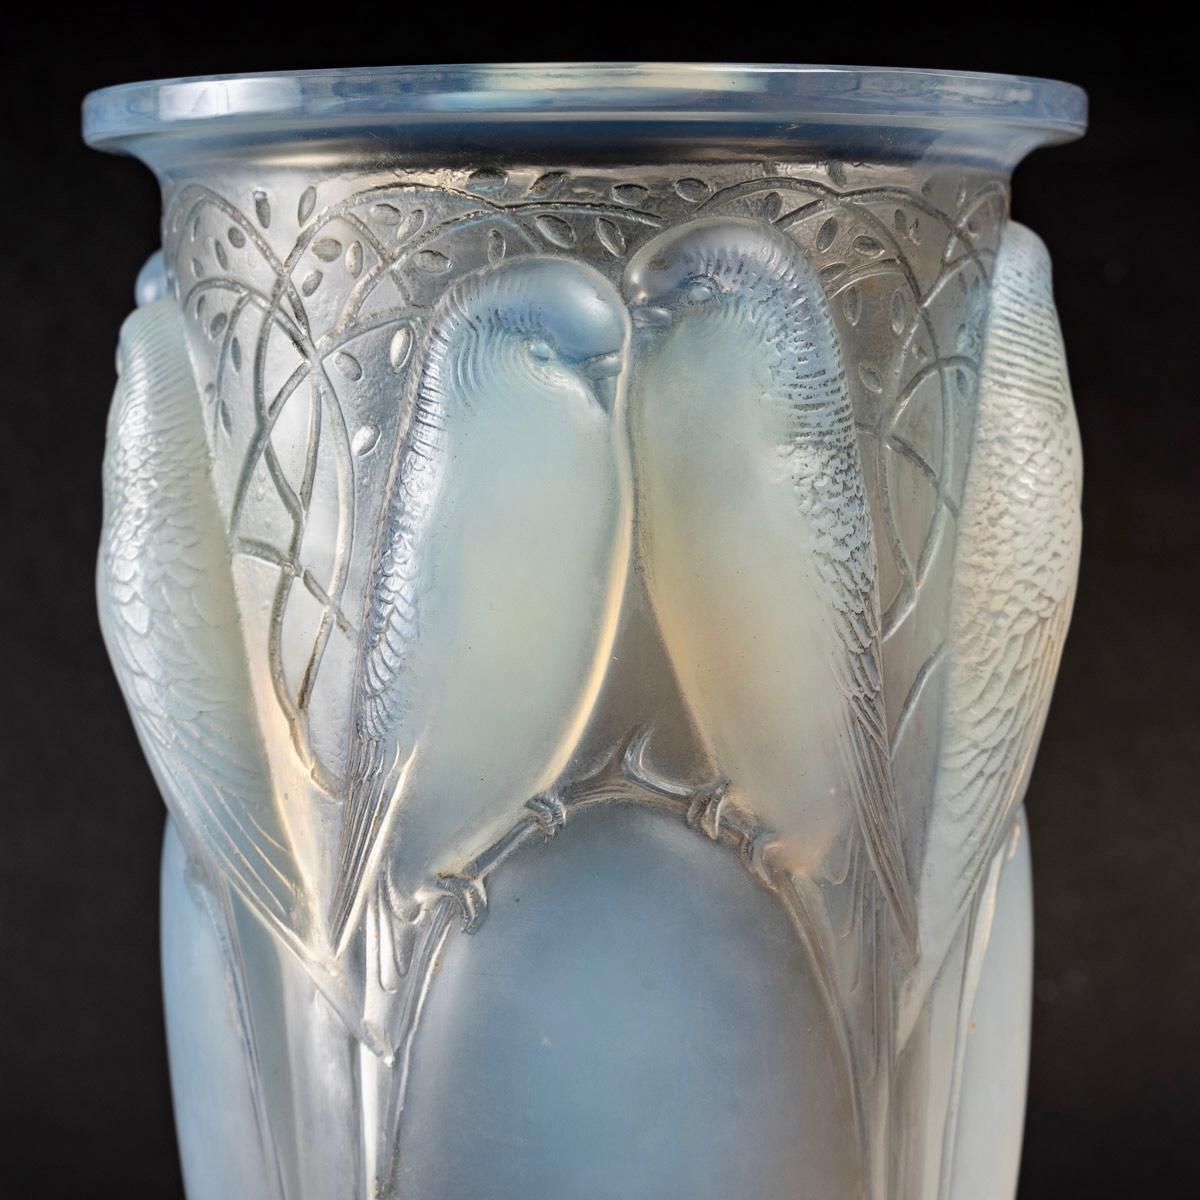 1924 rene lalique opalescent frosted and stained glass ceylan vase.